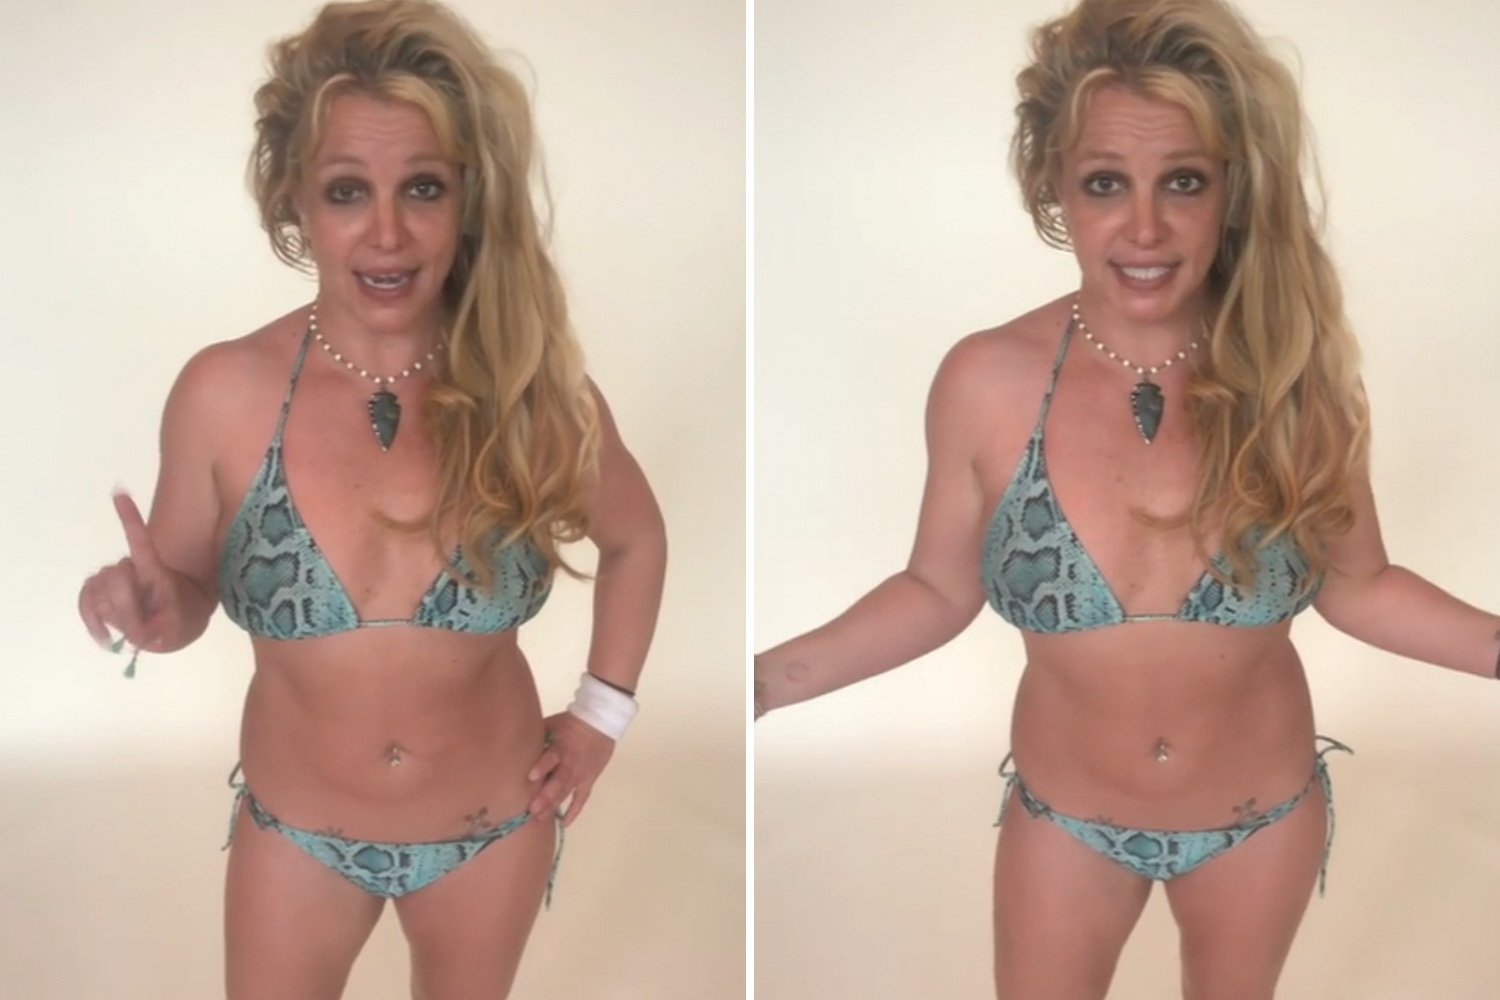 Britney Spears shows off her toned figure in snake print bikini as her conservatorship battle rages on